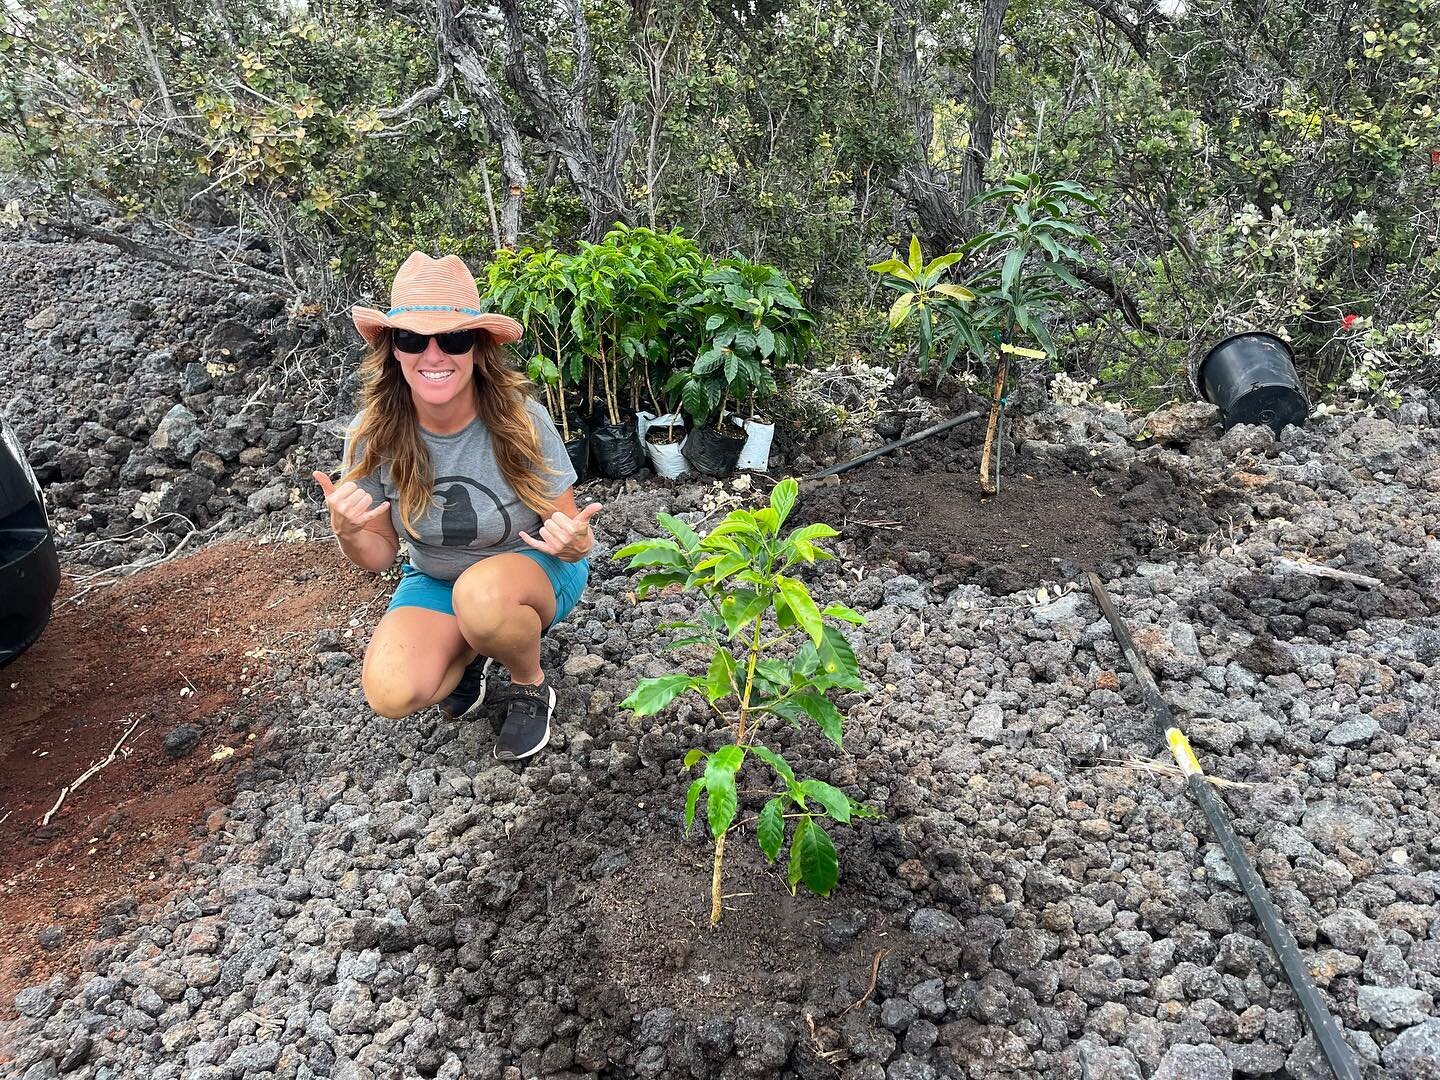 First coffee plants in! You can follow my farm journey @allrockfarmhawaii 

Gotta admit this is a fun part of my coffee hobby. I started obsessively learning about coffee a few years ago when I needed something to occupy my mind during a rough patch 